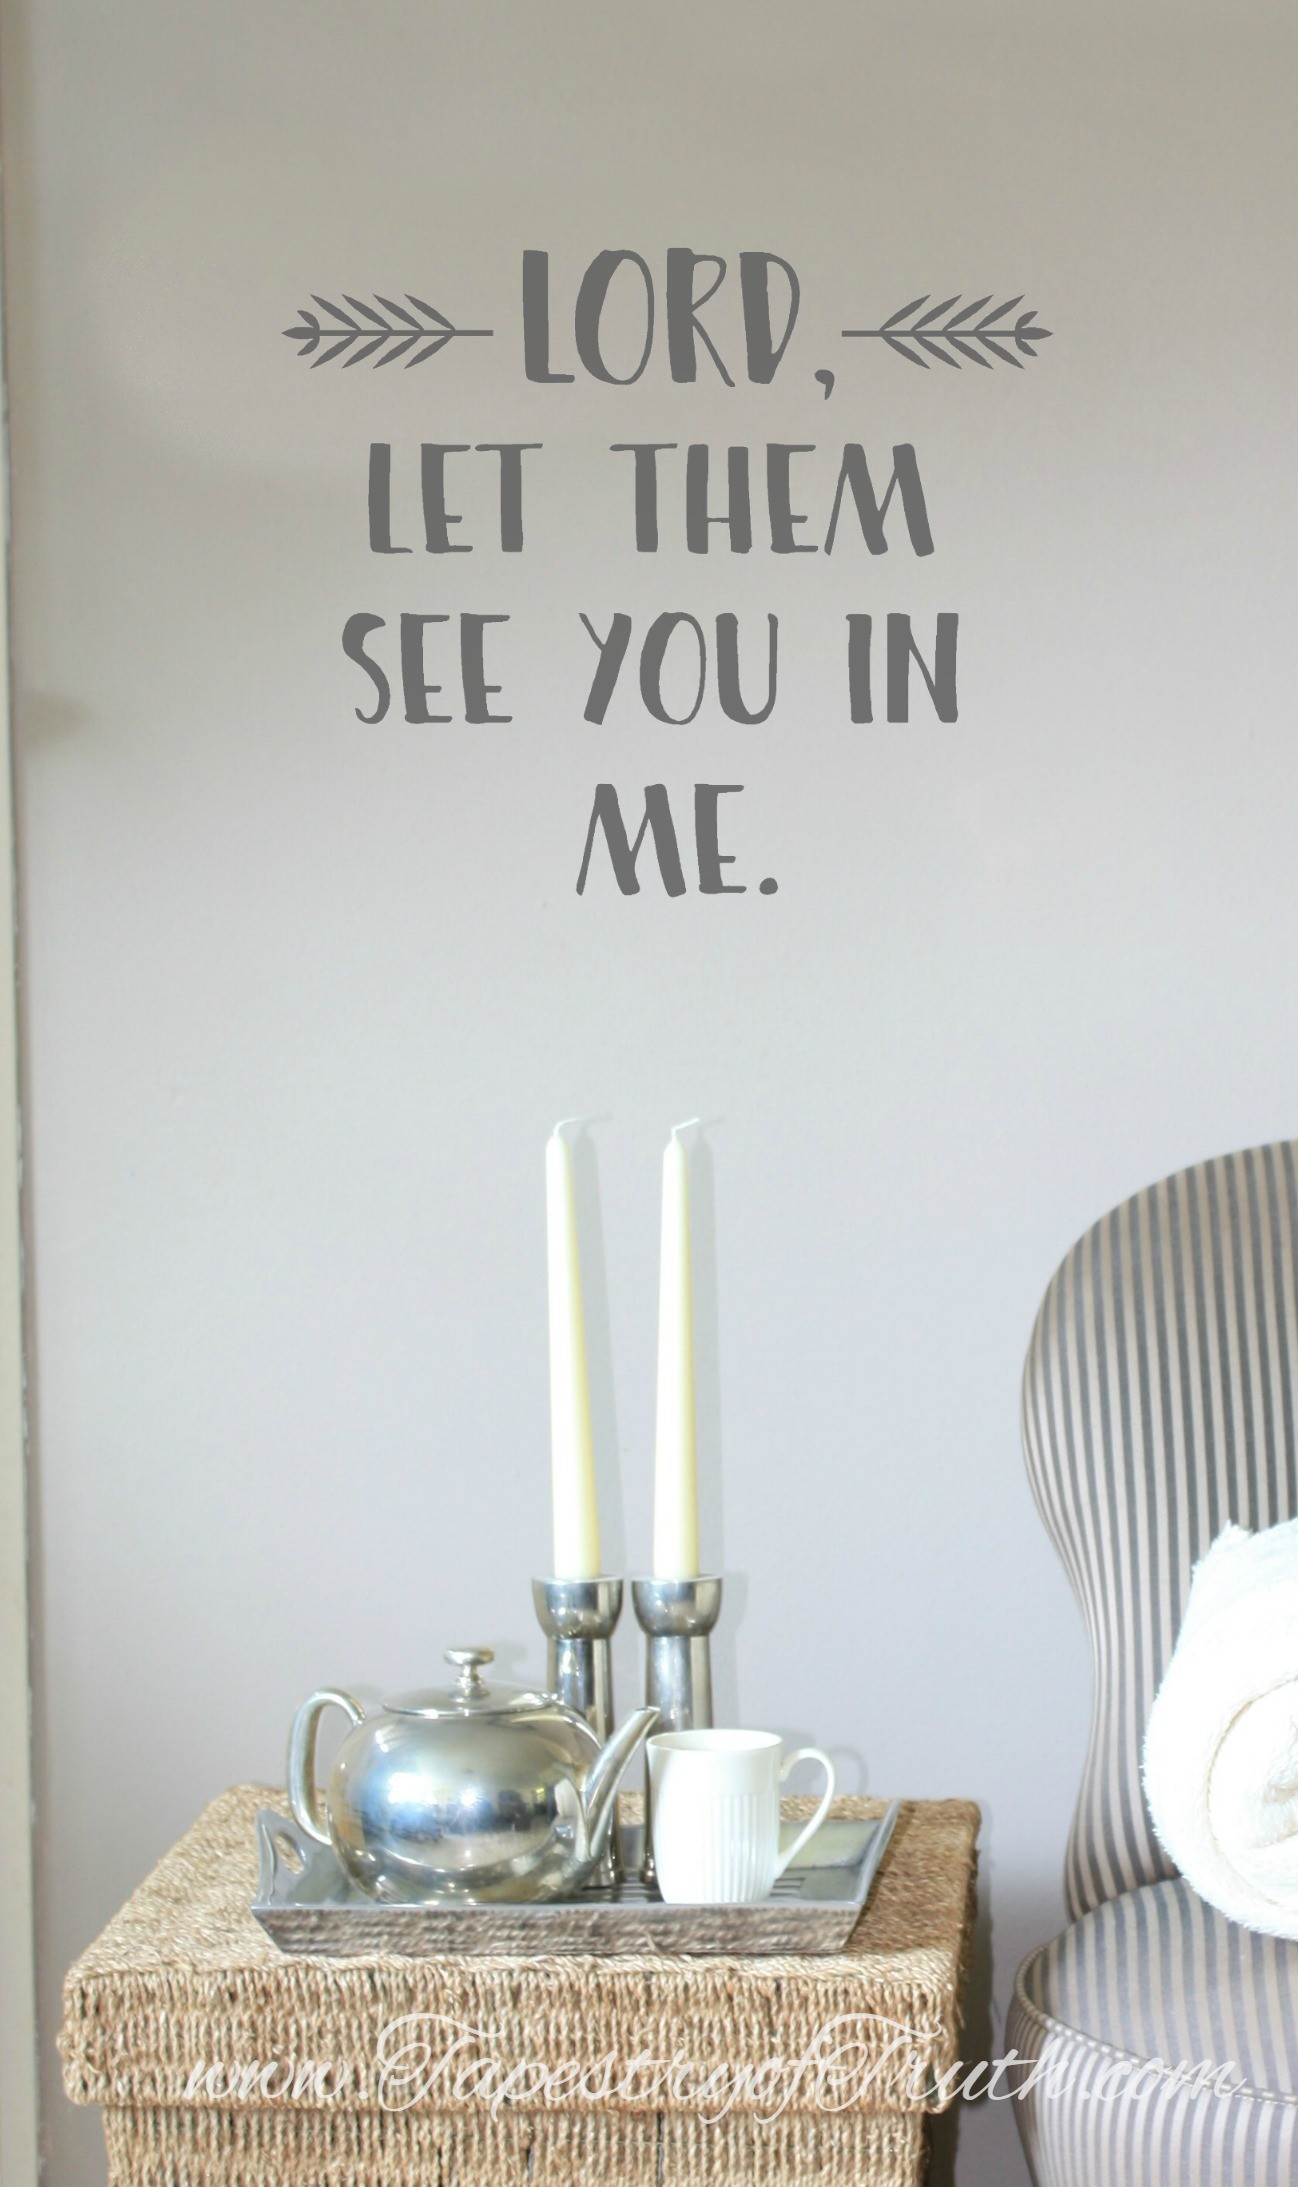 Lord, let them see you in me.